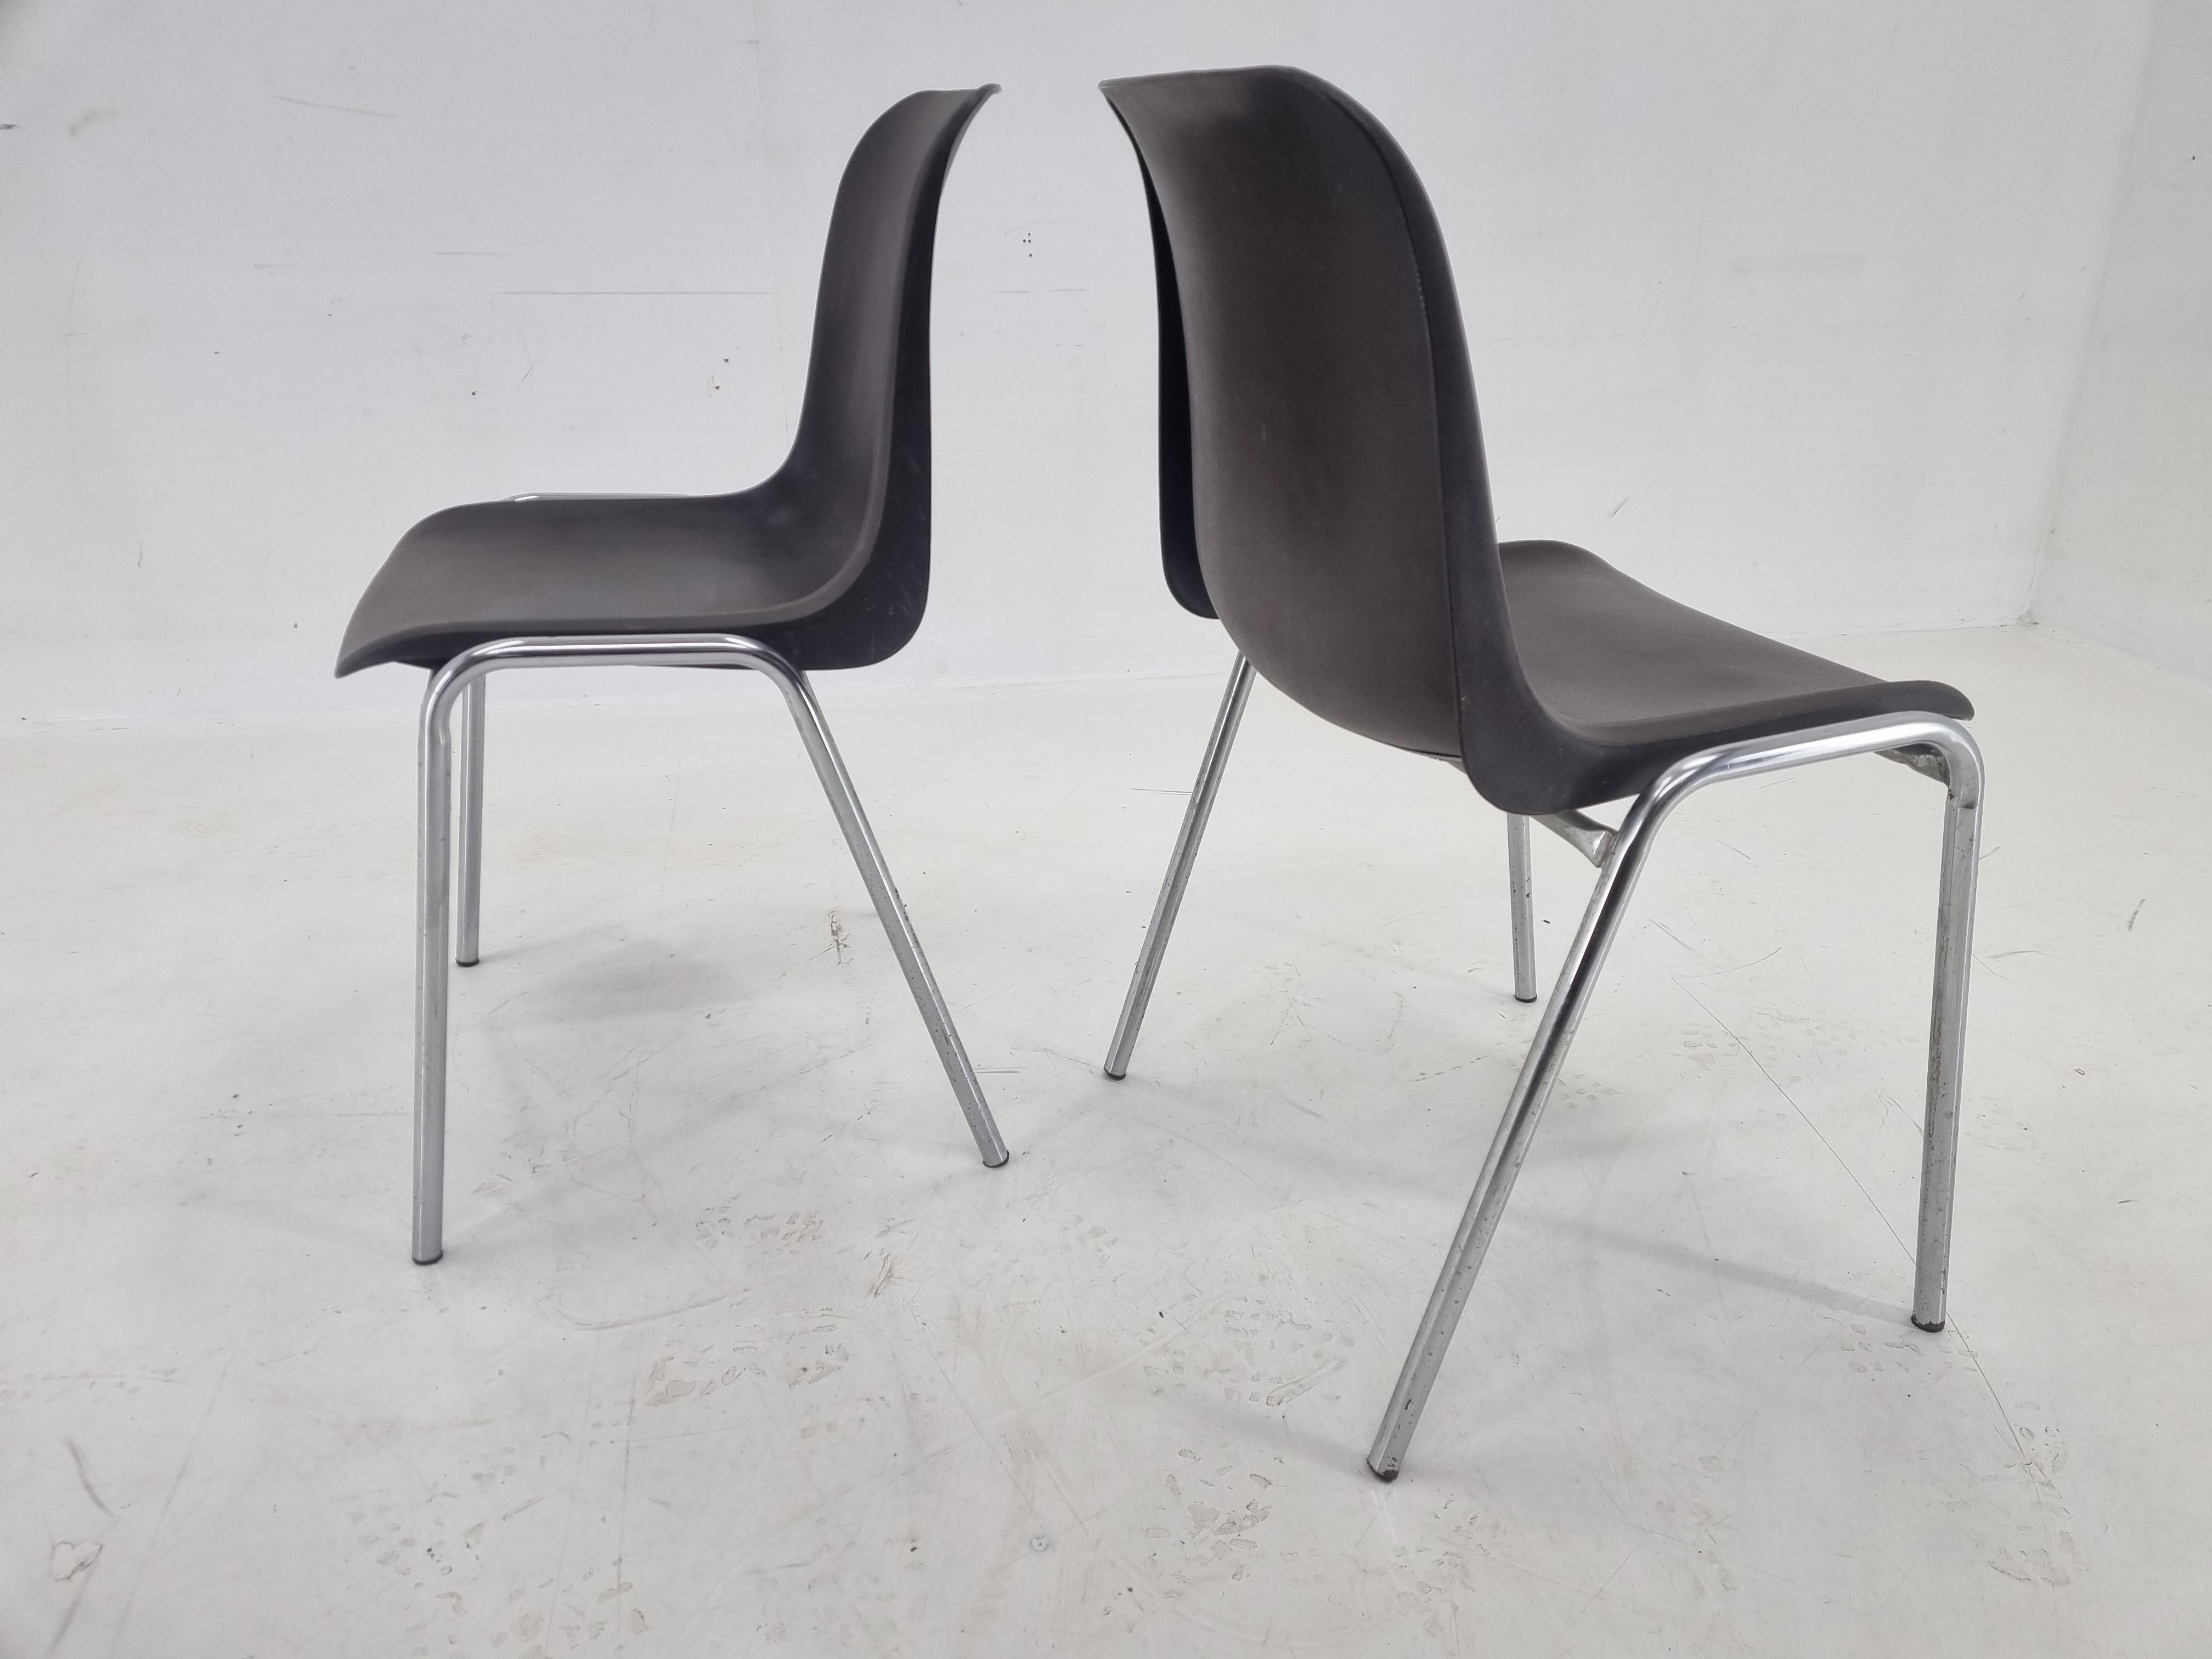 German Set of 2 Midcentury Chairs Europa Designed by Helmut Starke, 1990s For Sale